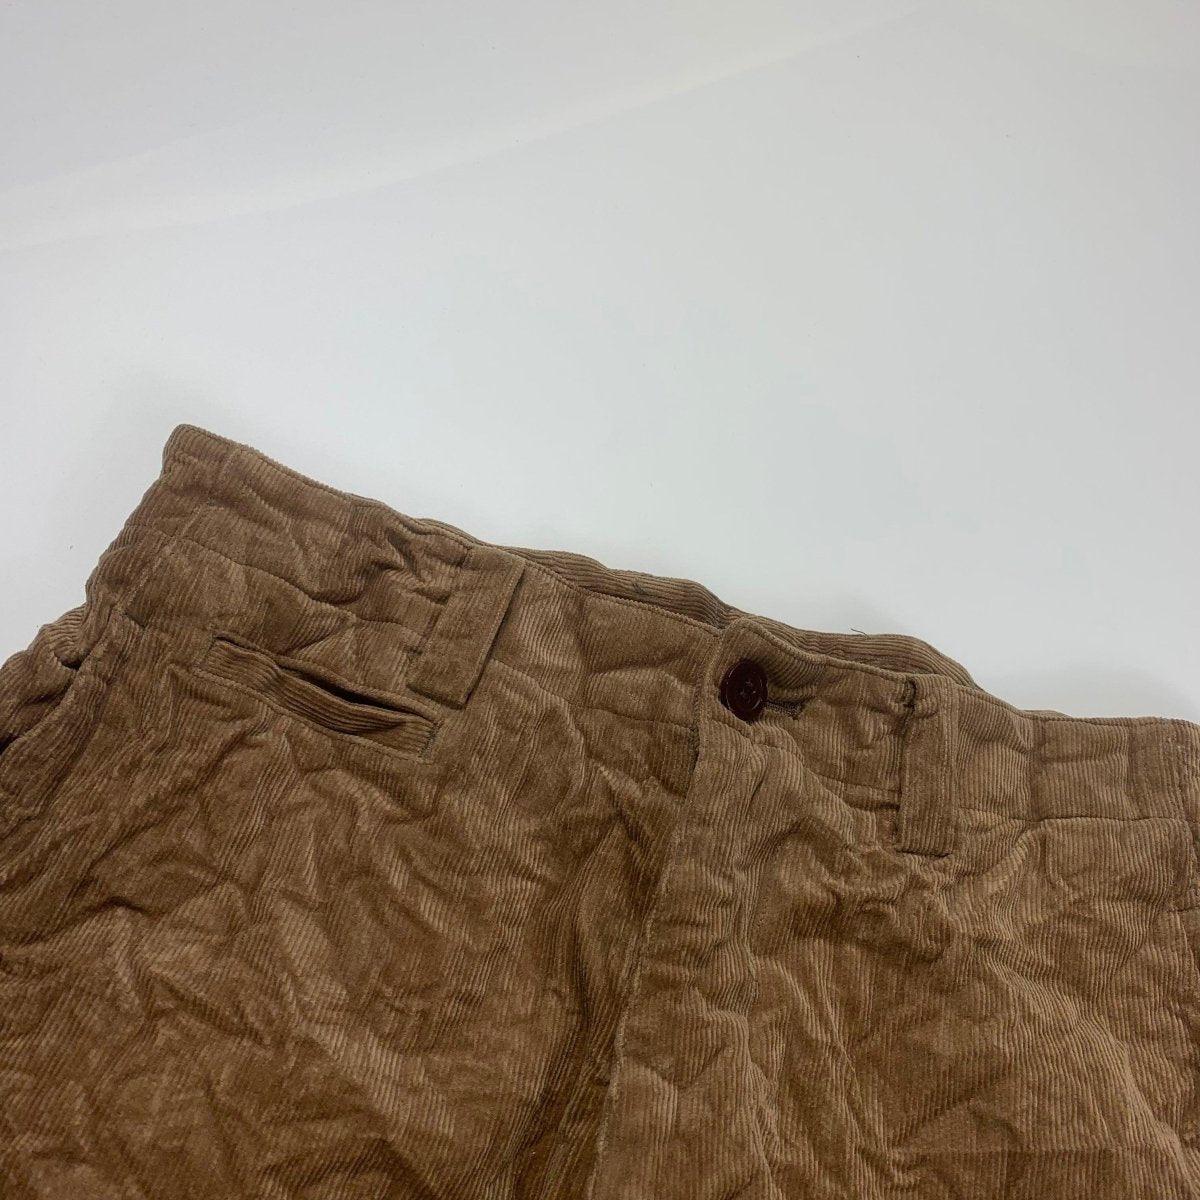 (32) Issey Miyake AW1995 Crinkled Wave Corduroy Trousers - Known Source